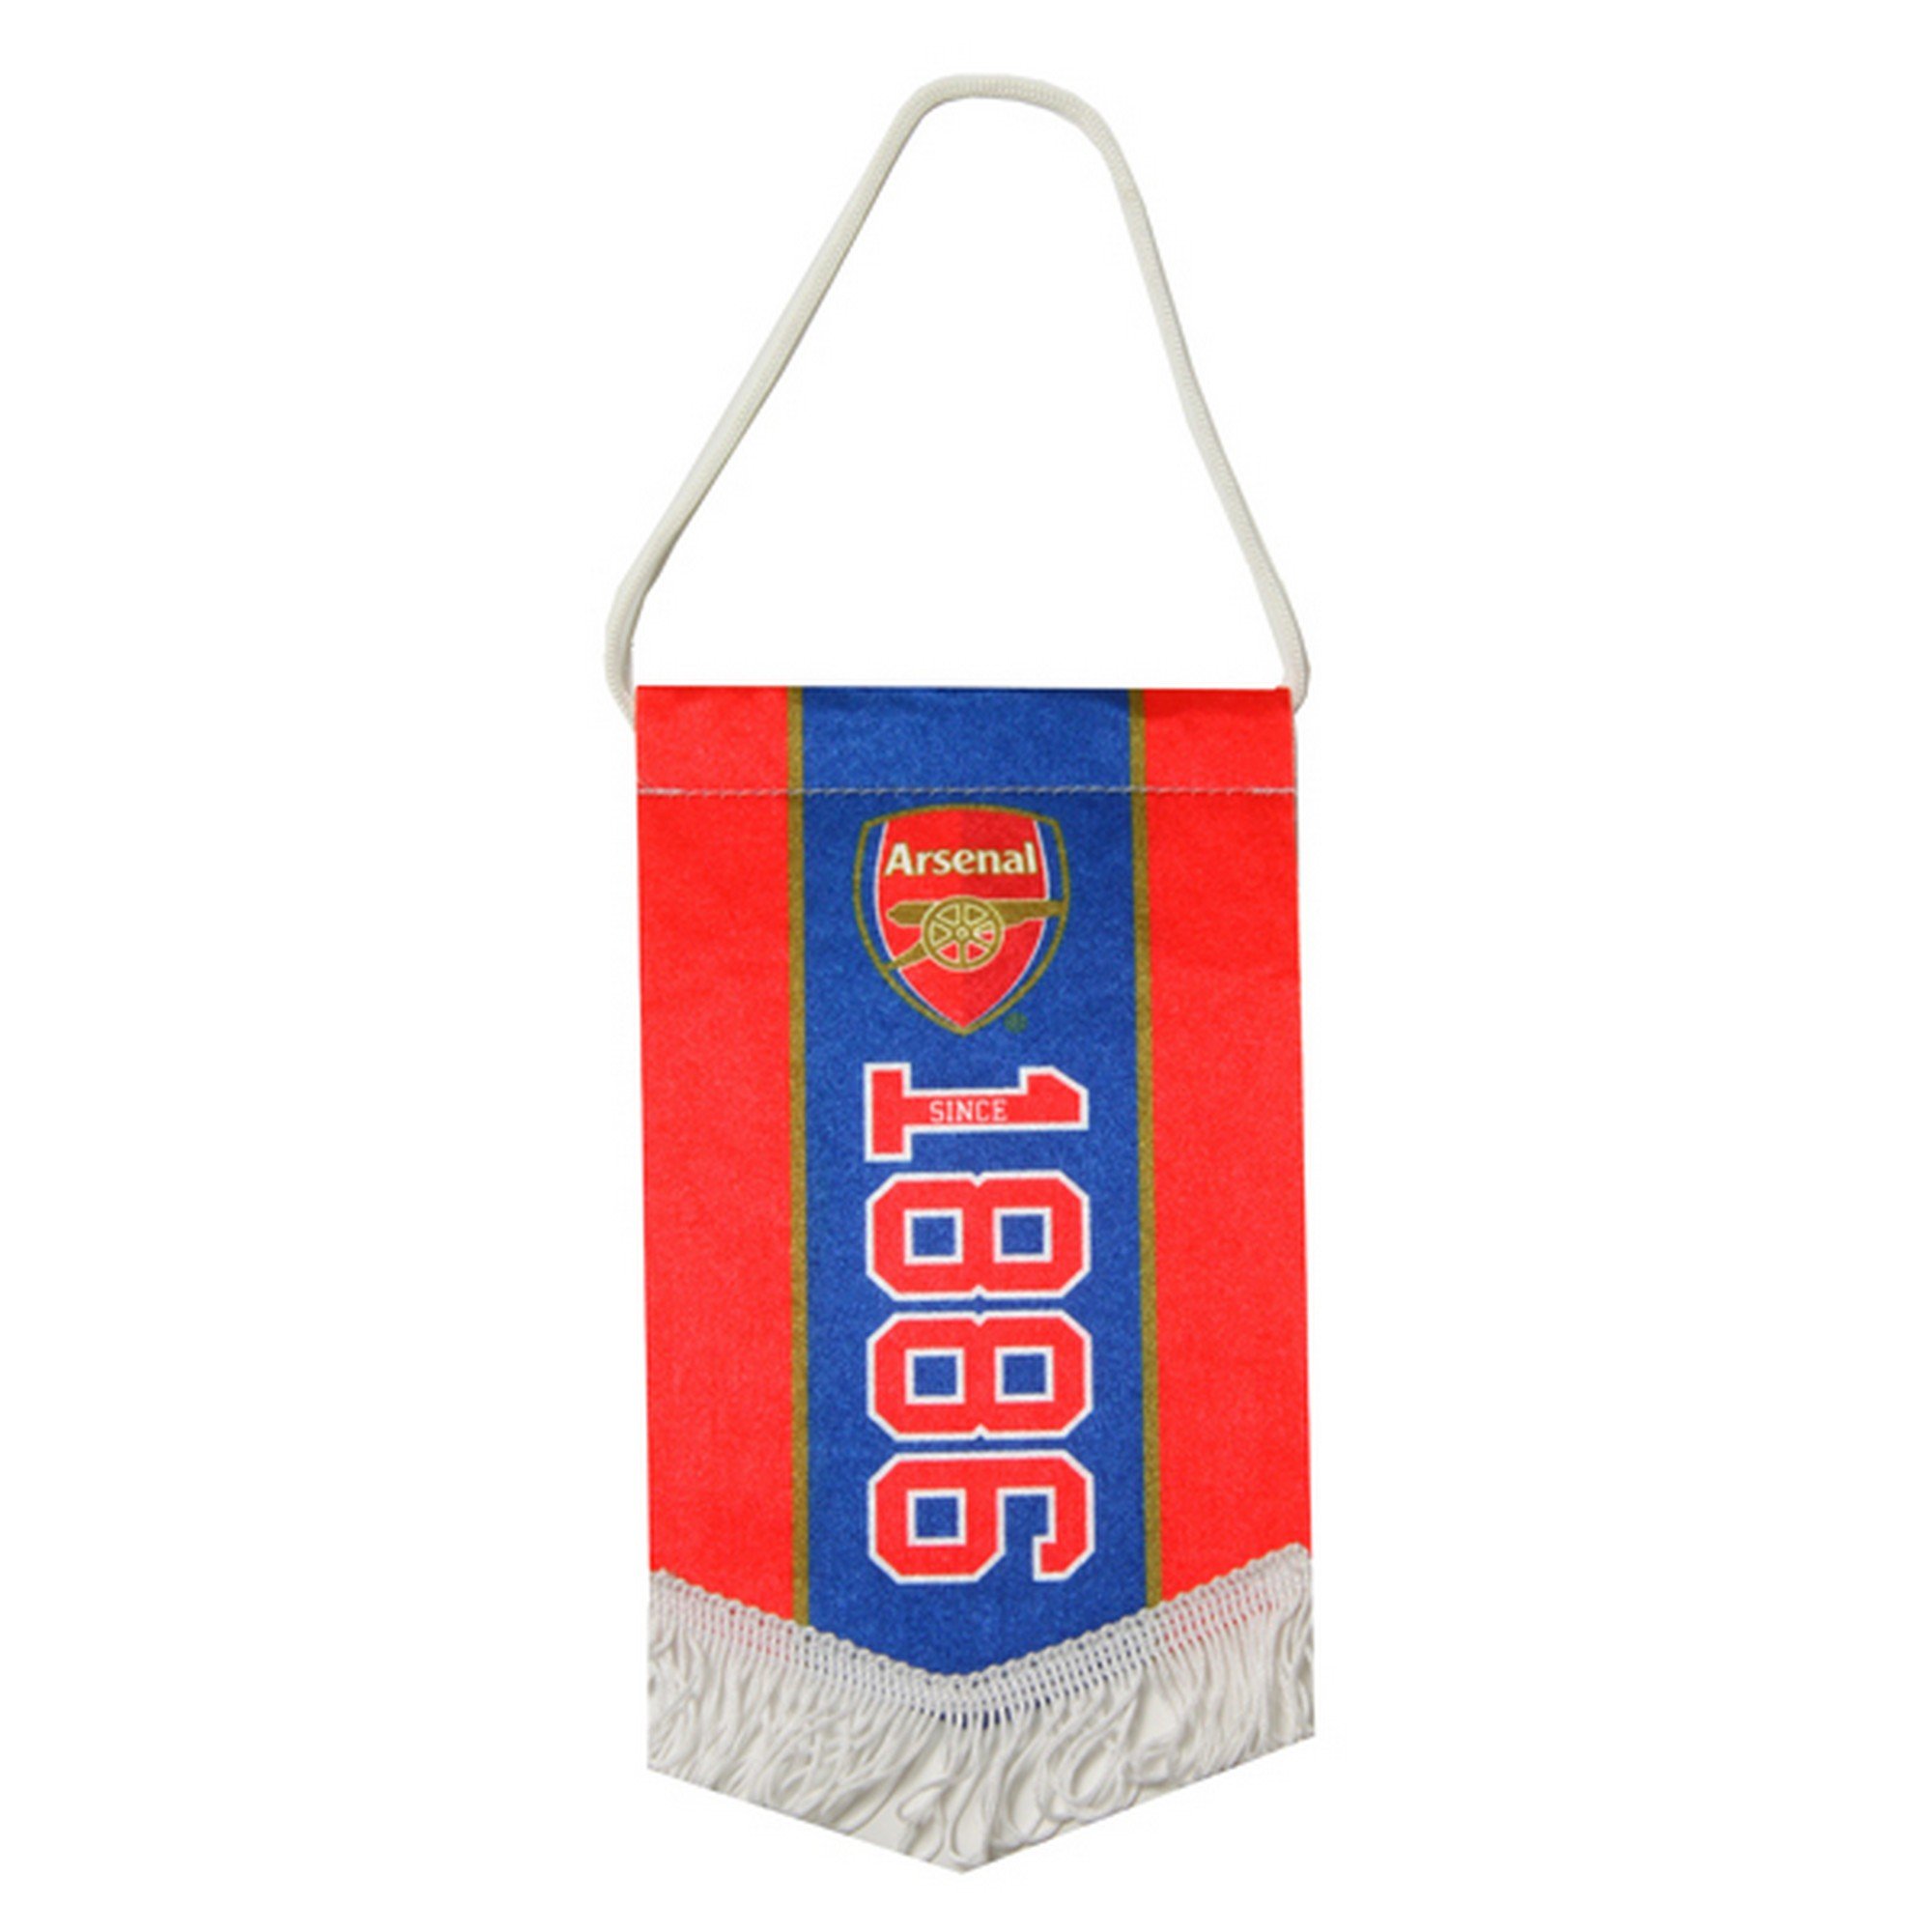 Arsenal FC Football Club Since 1886 Flag Style Red Supporter Fan Match Banner